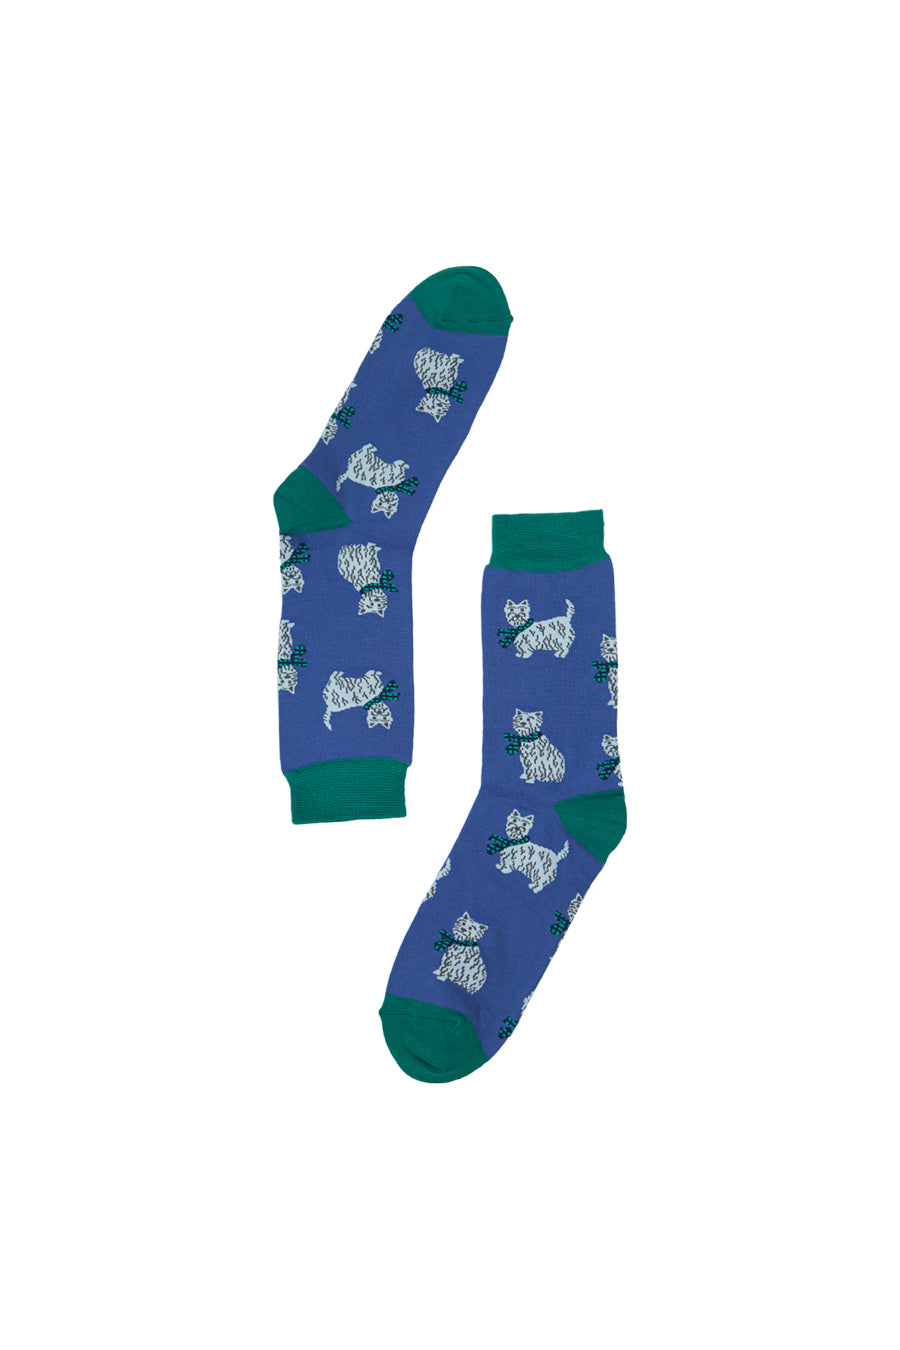 men's blue bamboo socks featuring west highland terrier dogs